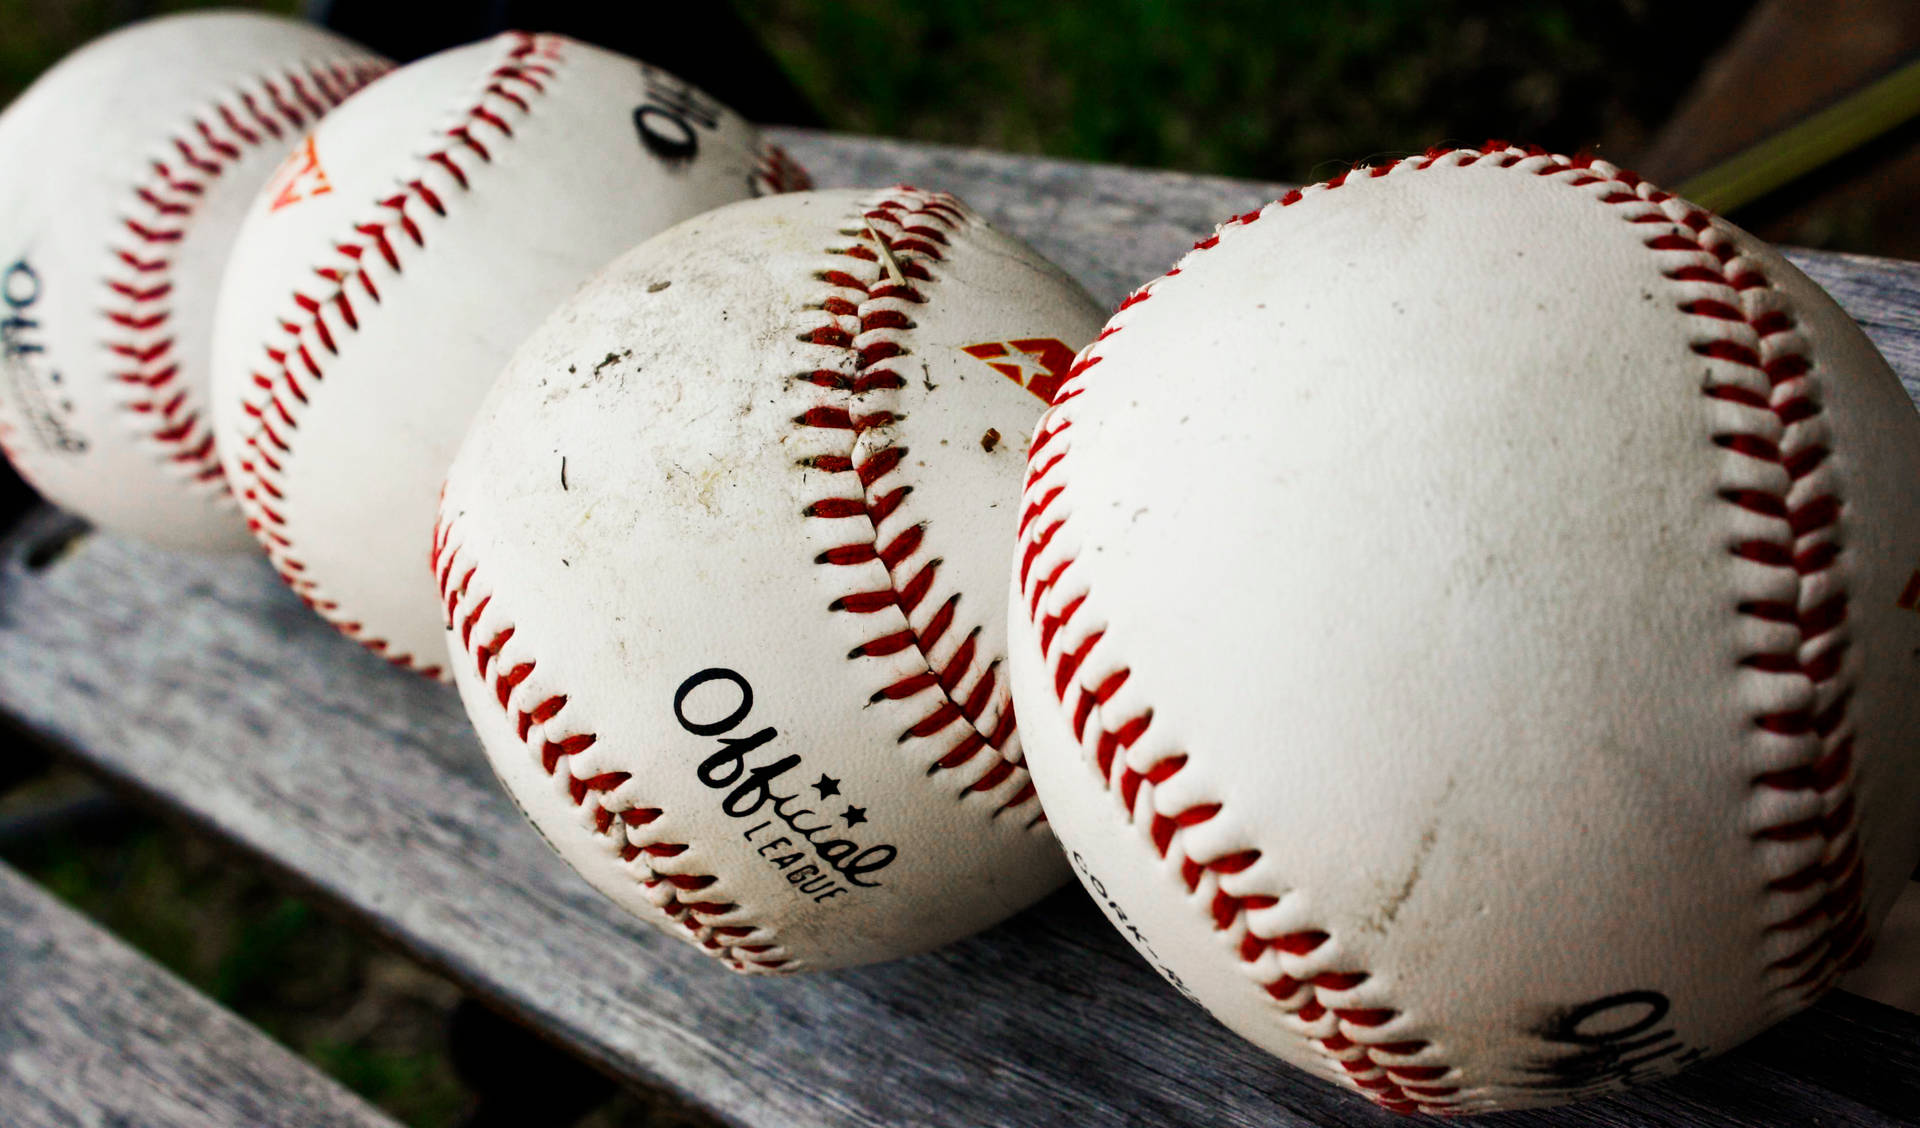 Baseball 3885X2282 Wallpaper and Background Image